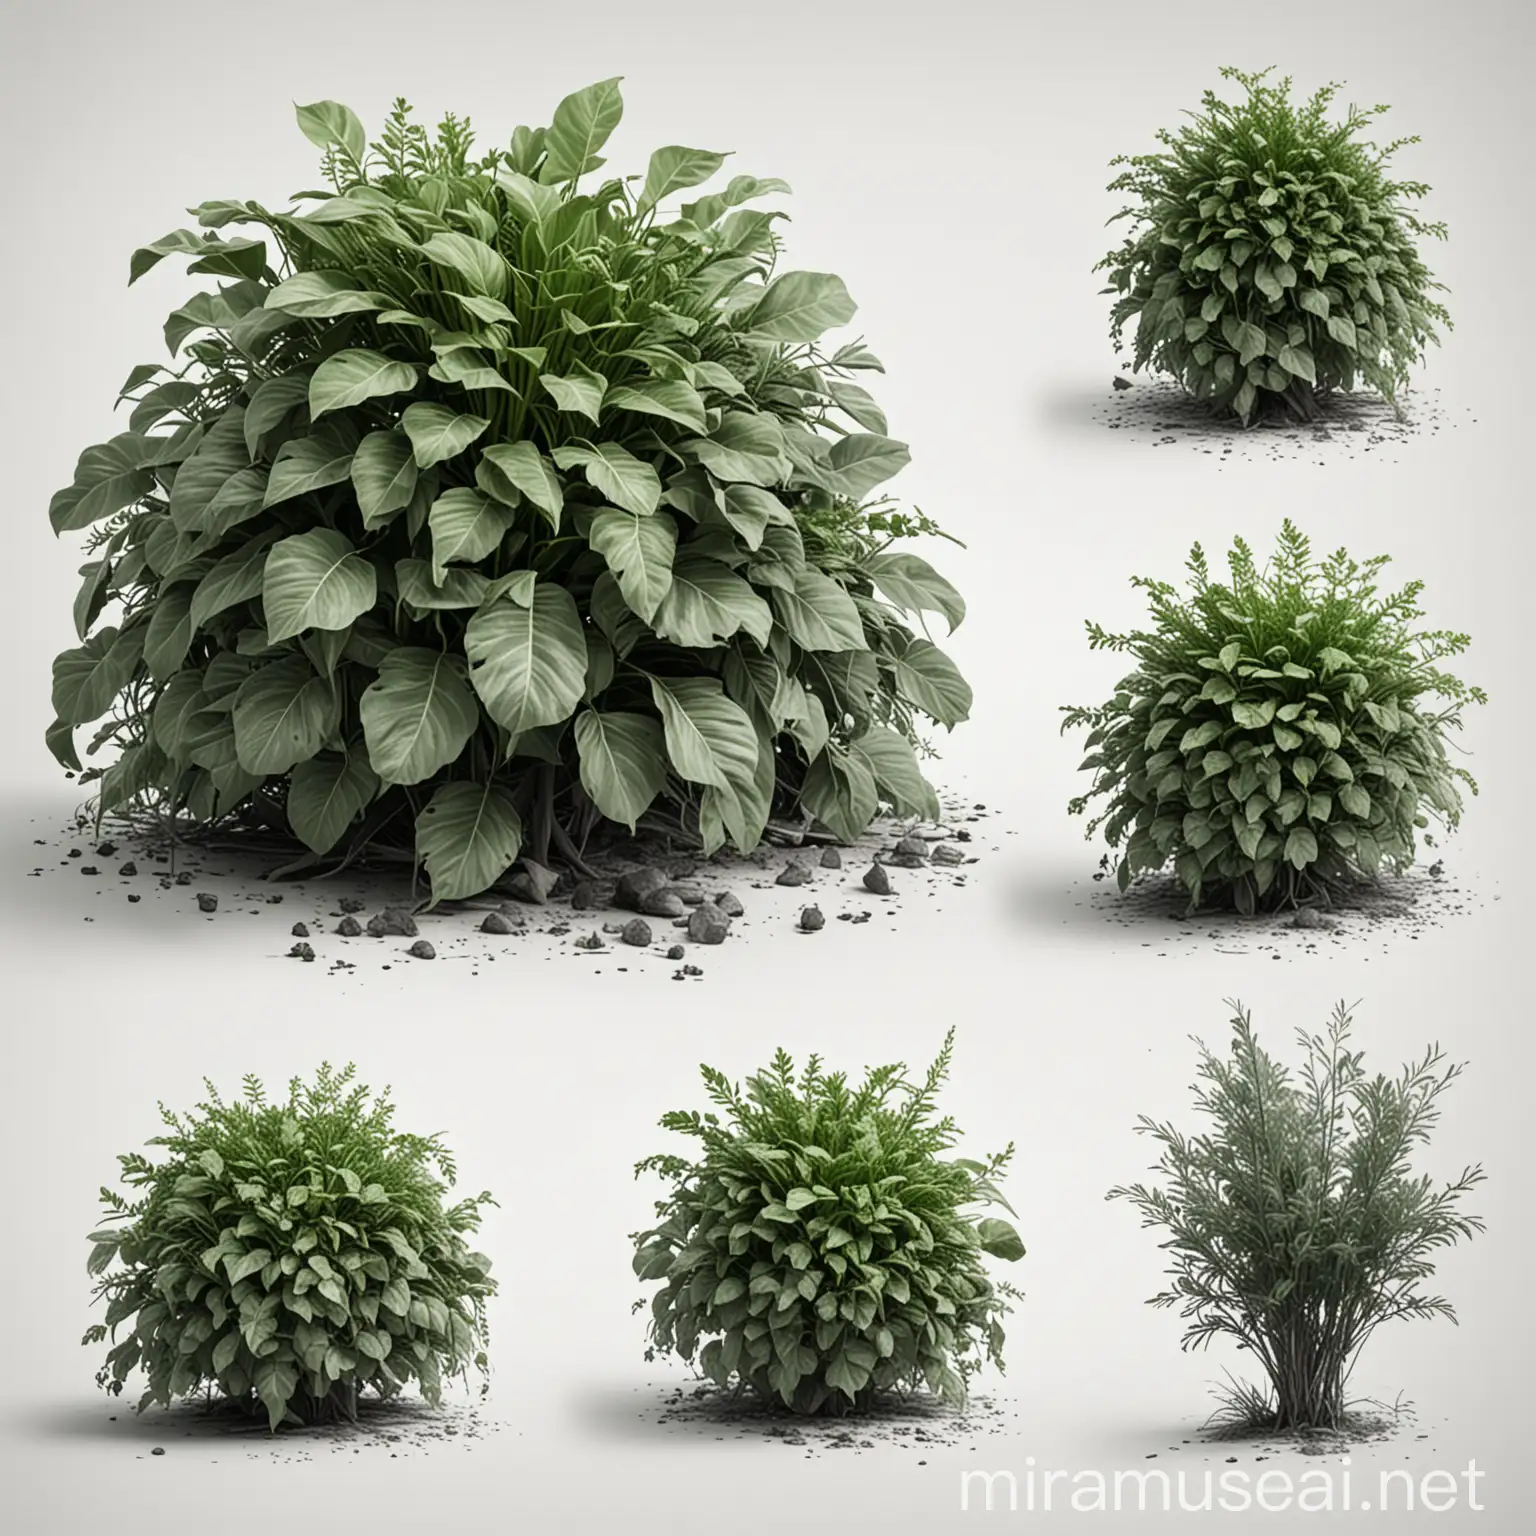 Realistic Green Plant Foliage Sketch Monochrome Dusty Piles on White Background